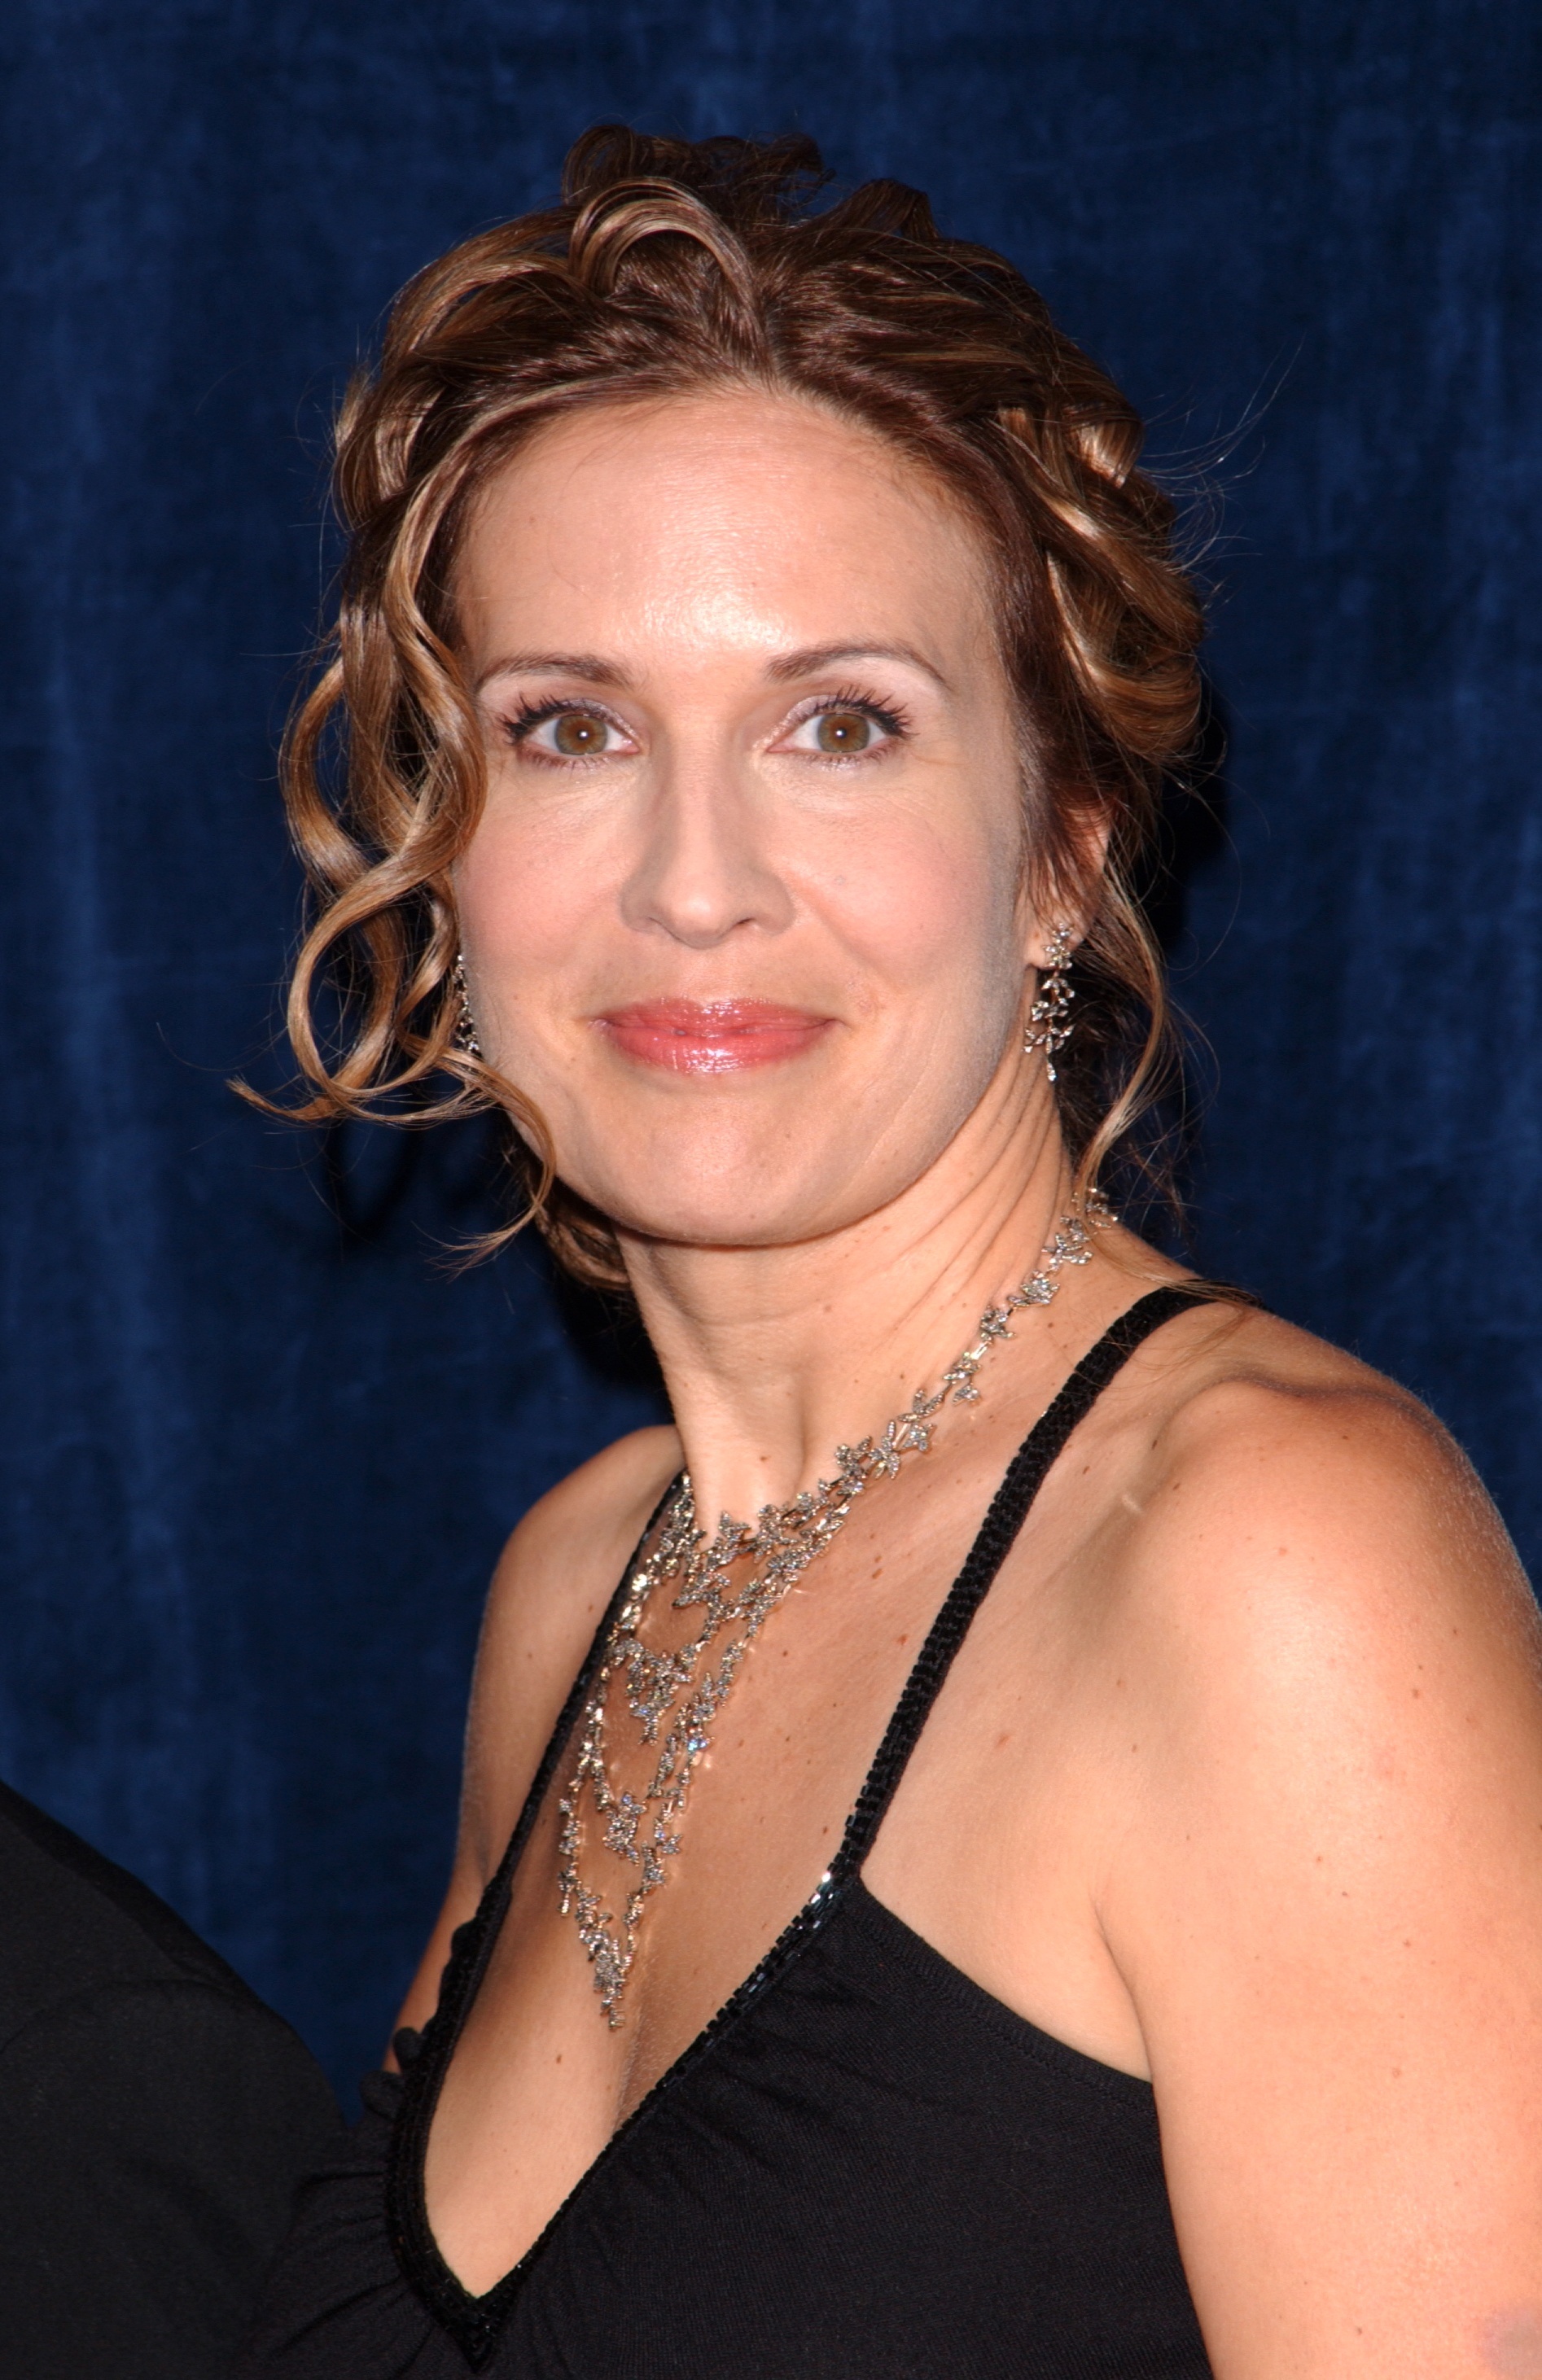 Dana Reeve at the Christopher Reeve Paralysis Foundation 13th Annual Gala on November 18, 2004, in New York City. | Source: Getty Images